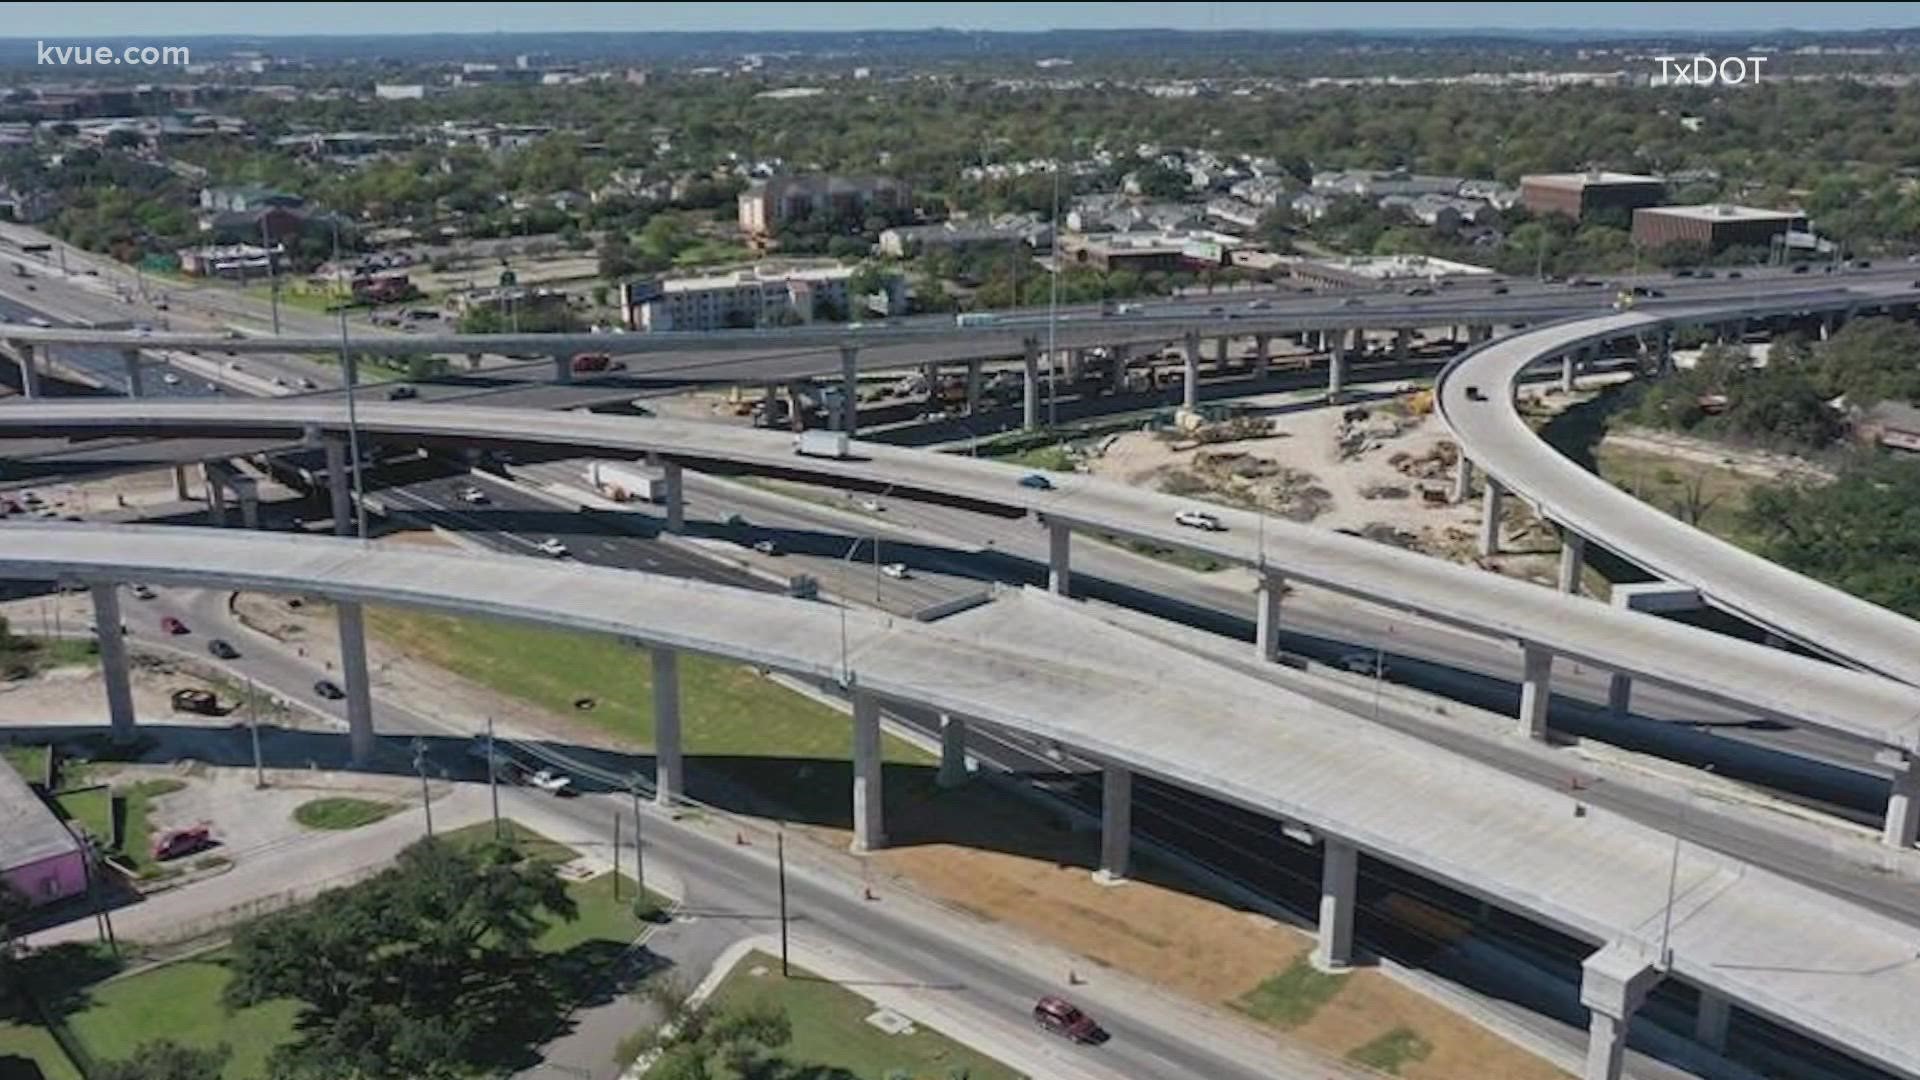 Earlier this year, TxDOT conducted multiple flyover implosions as part of a massive project to make travel smoother for drivers.